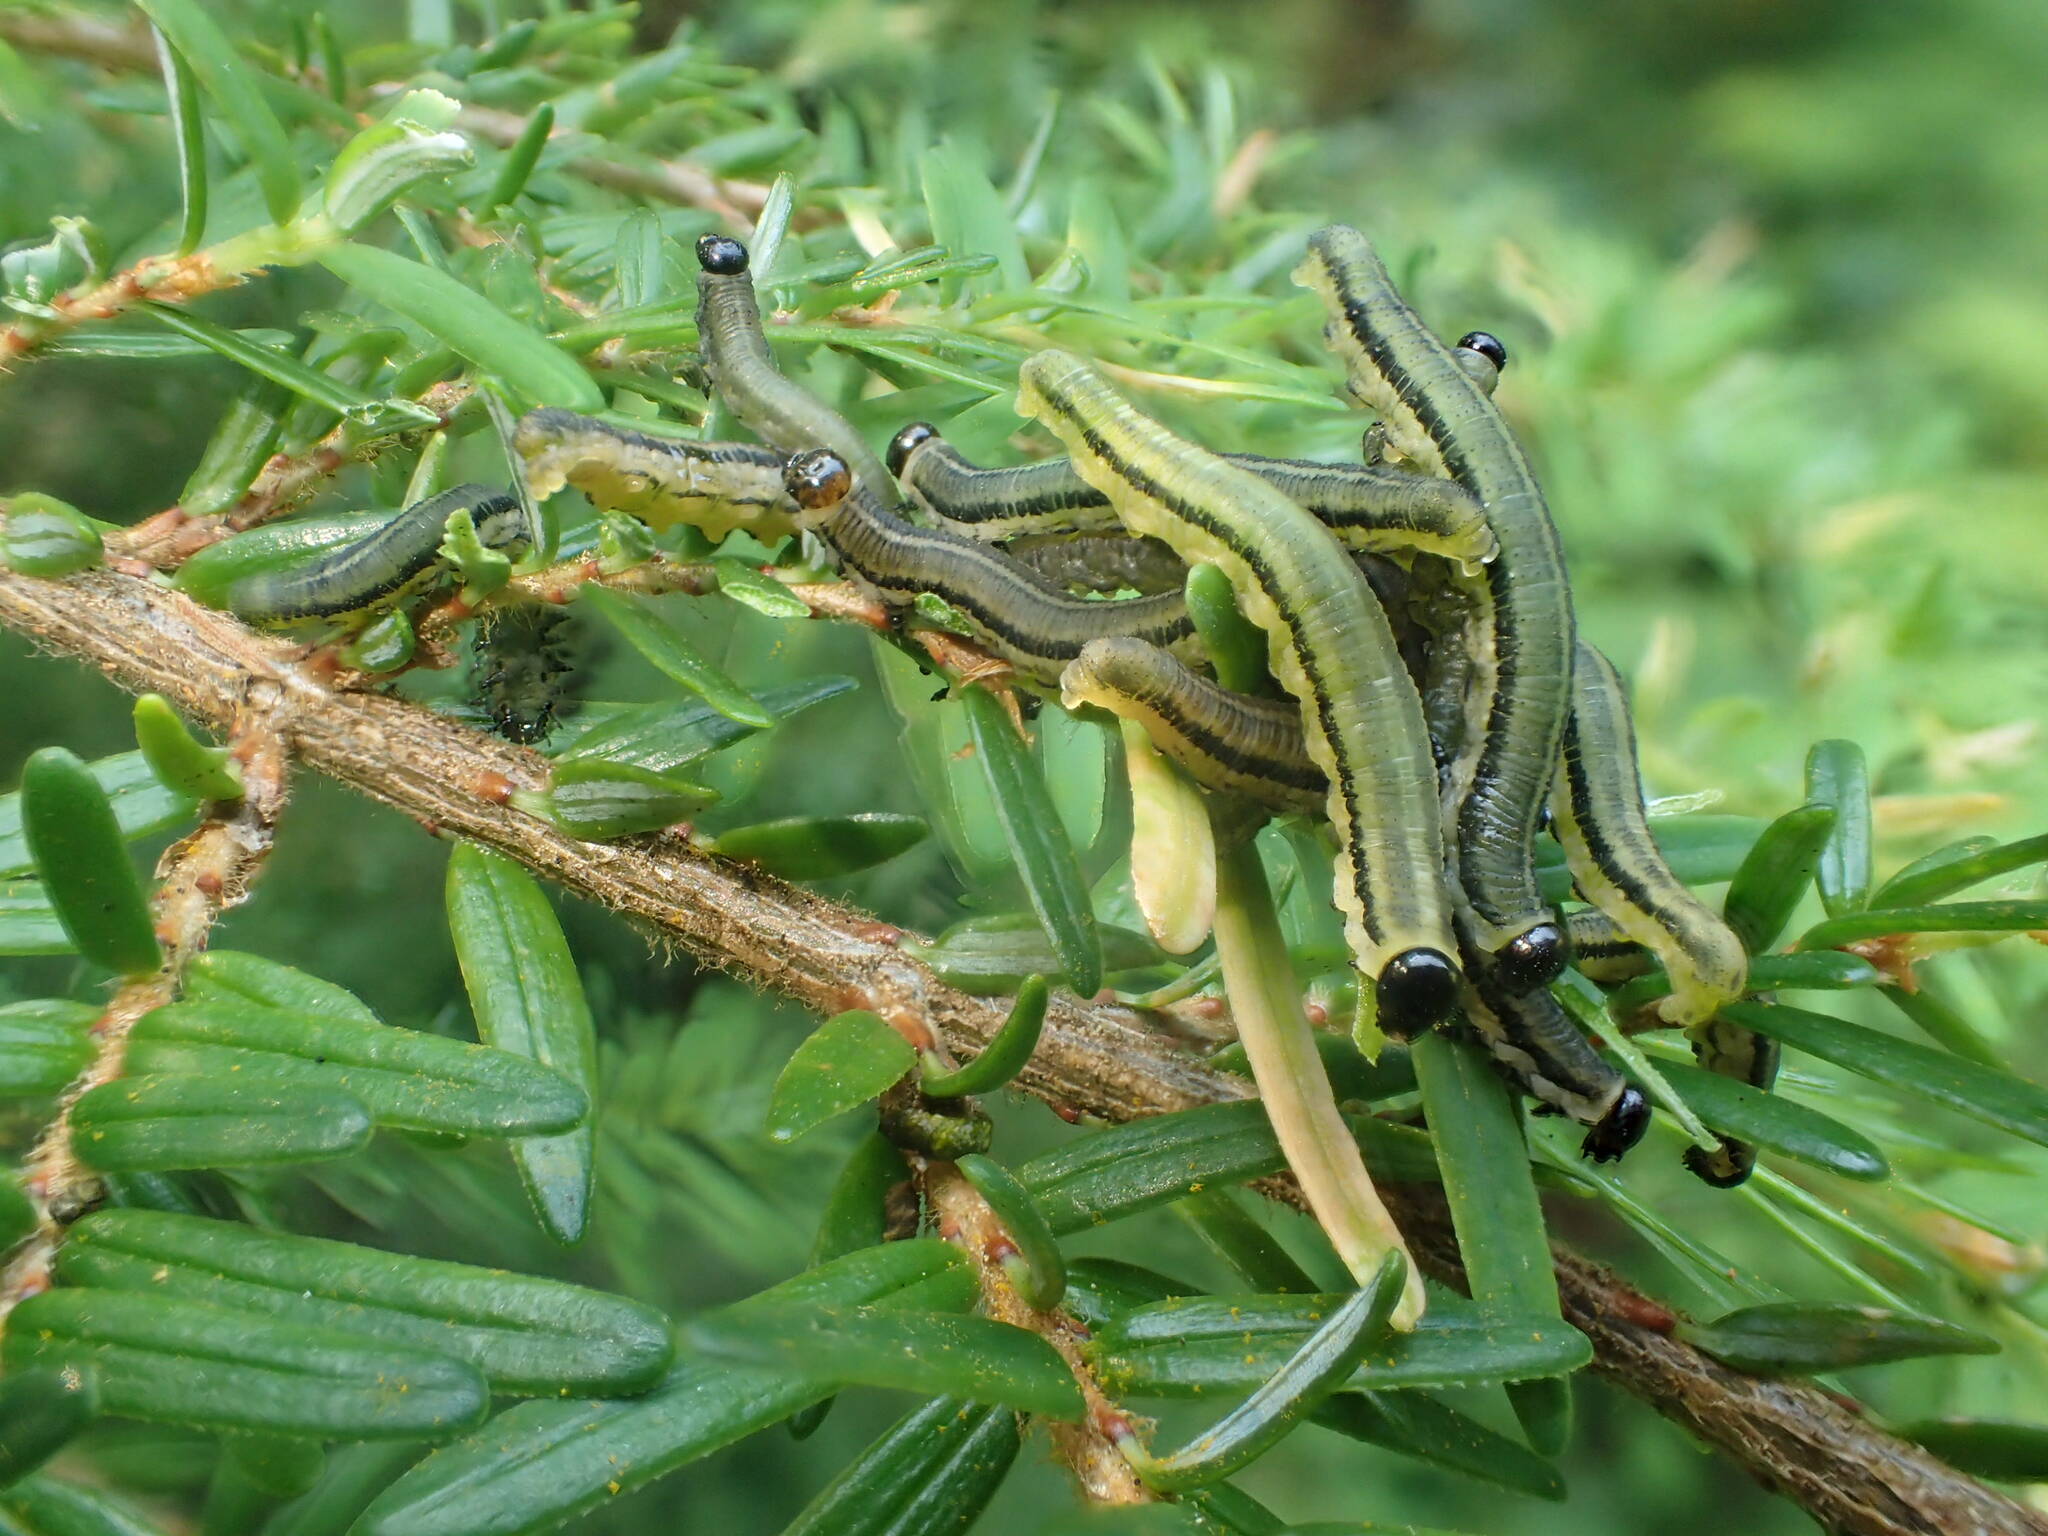 This July 2019 photo shows hemlock sawfly larvae. The larvae are among defoliating insects native to Southeast Alaska. (Courtesy Photo / U.S. Forest Service Alaska Region)